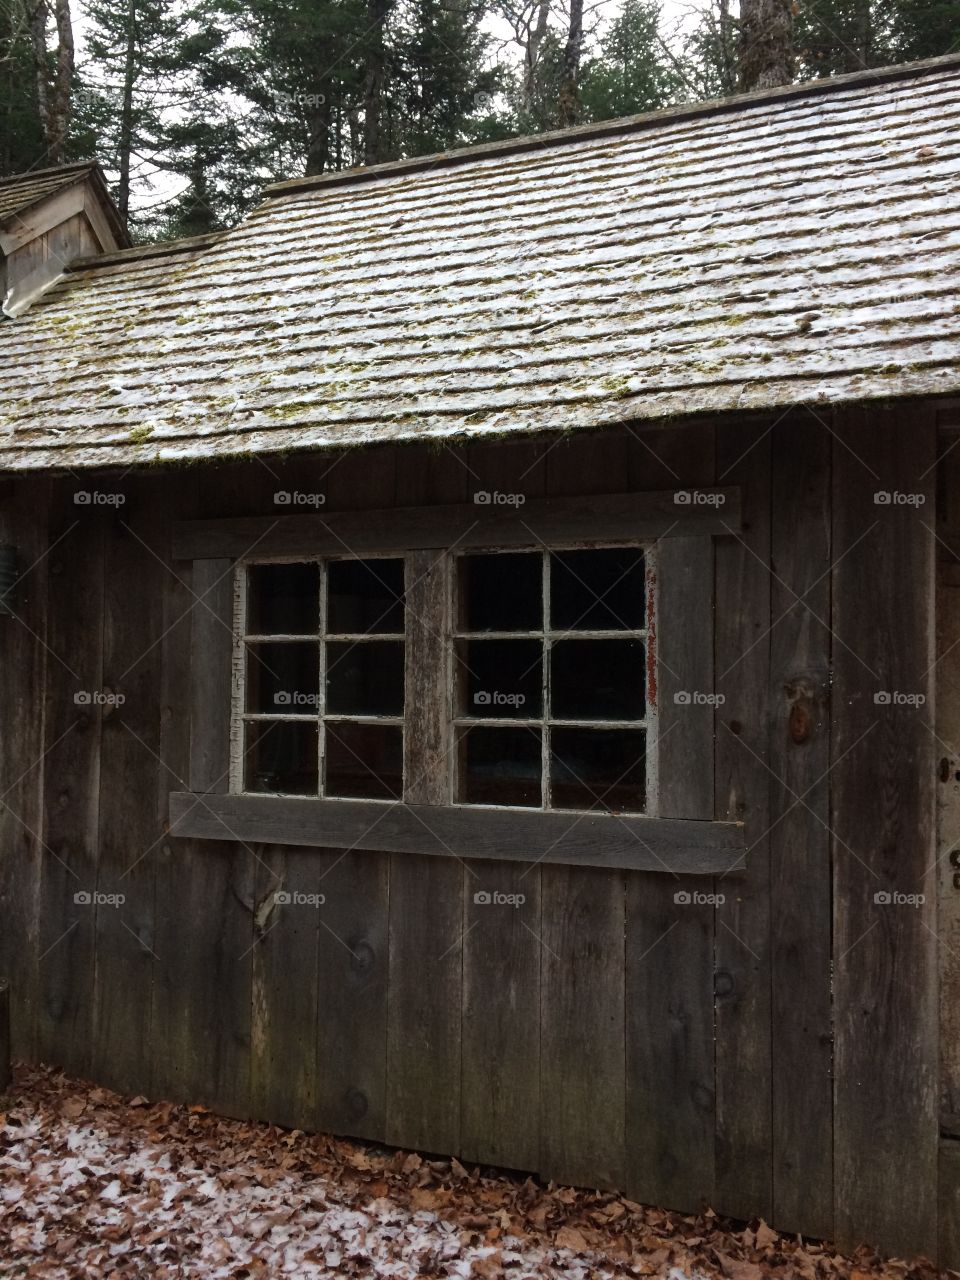 Maple sugar shack in the woods